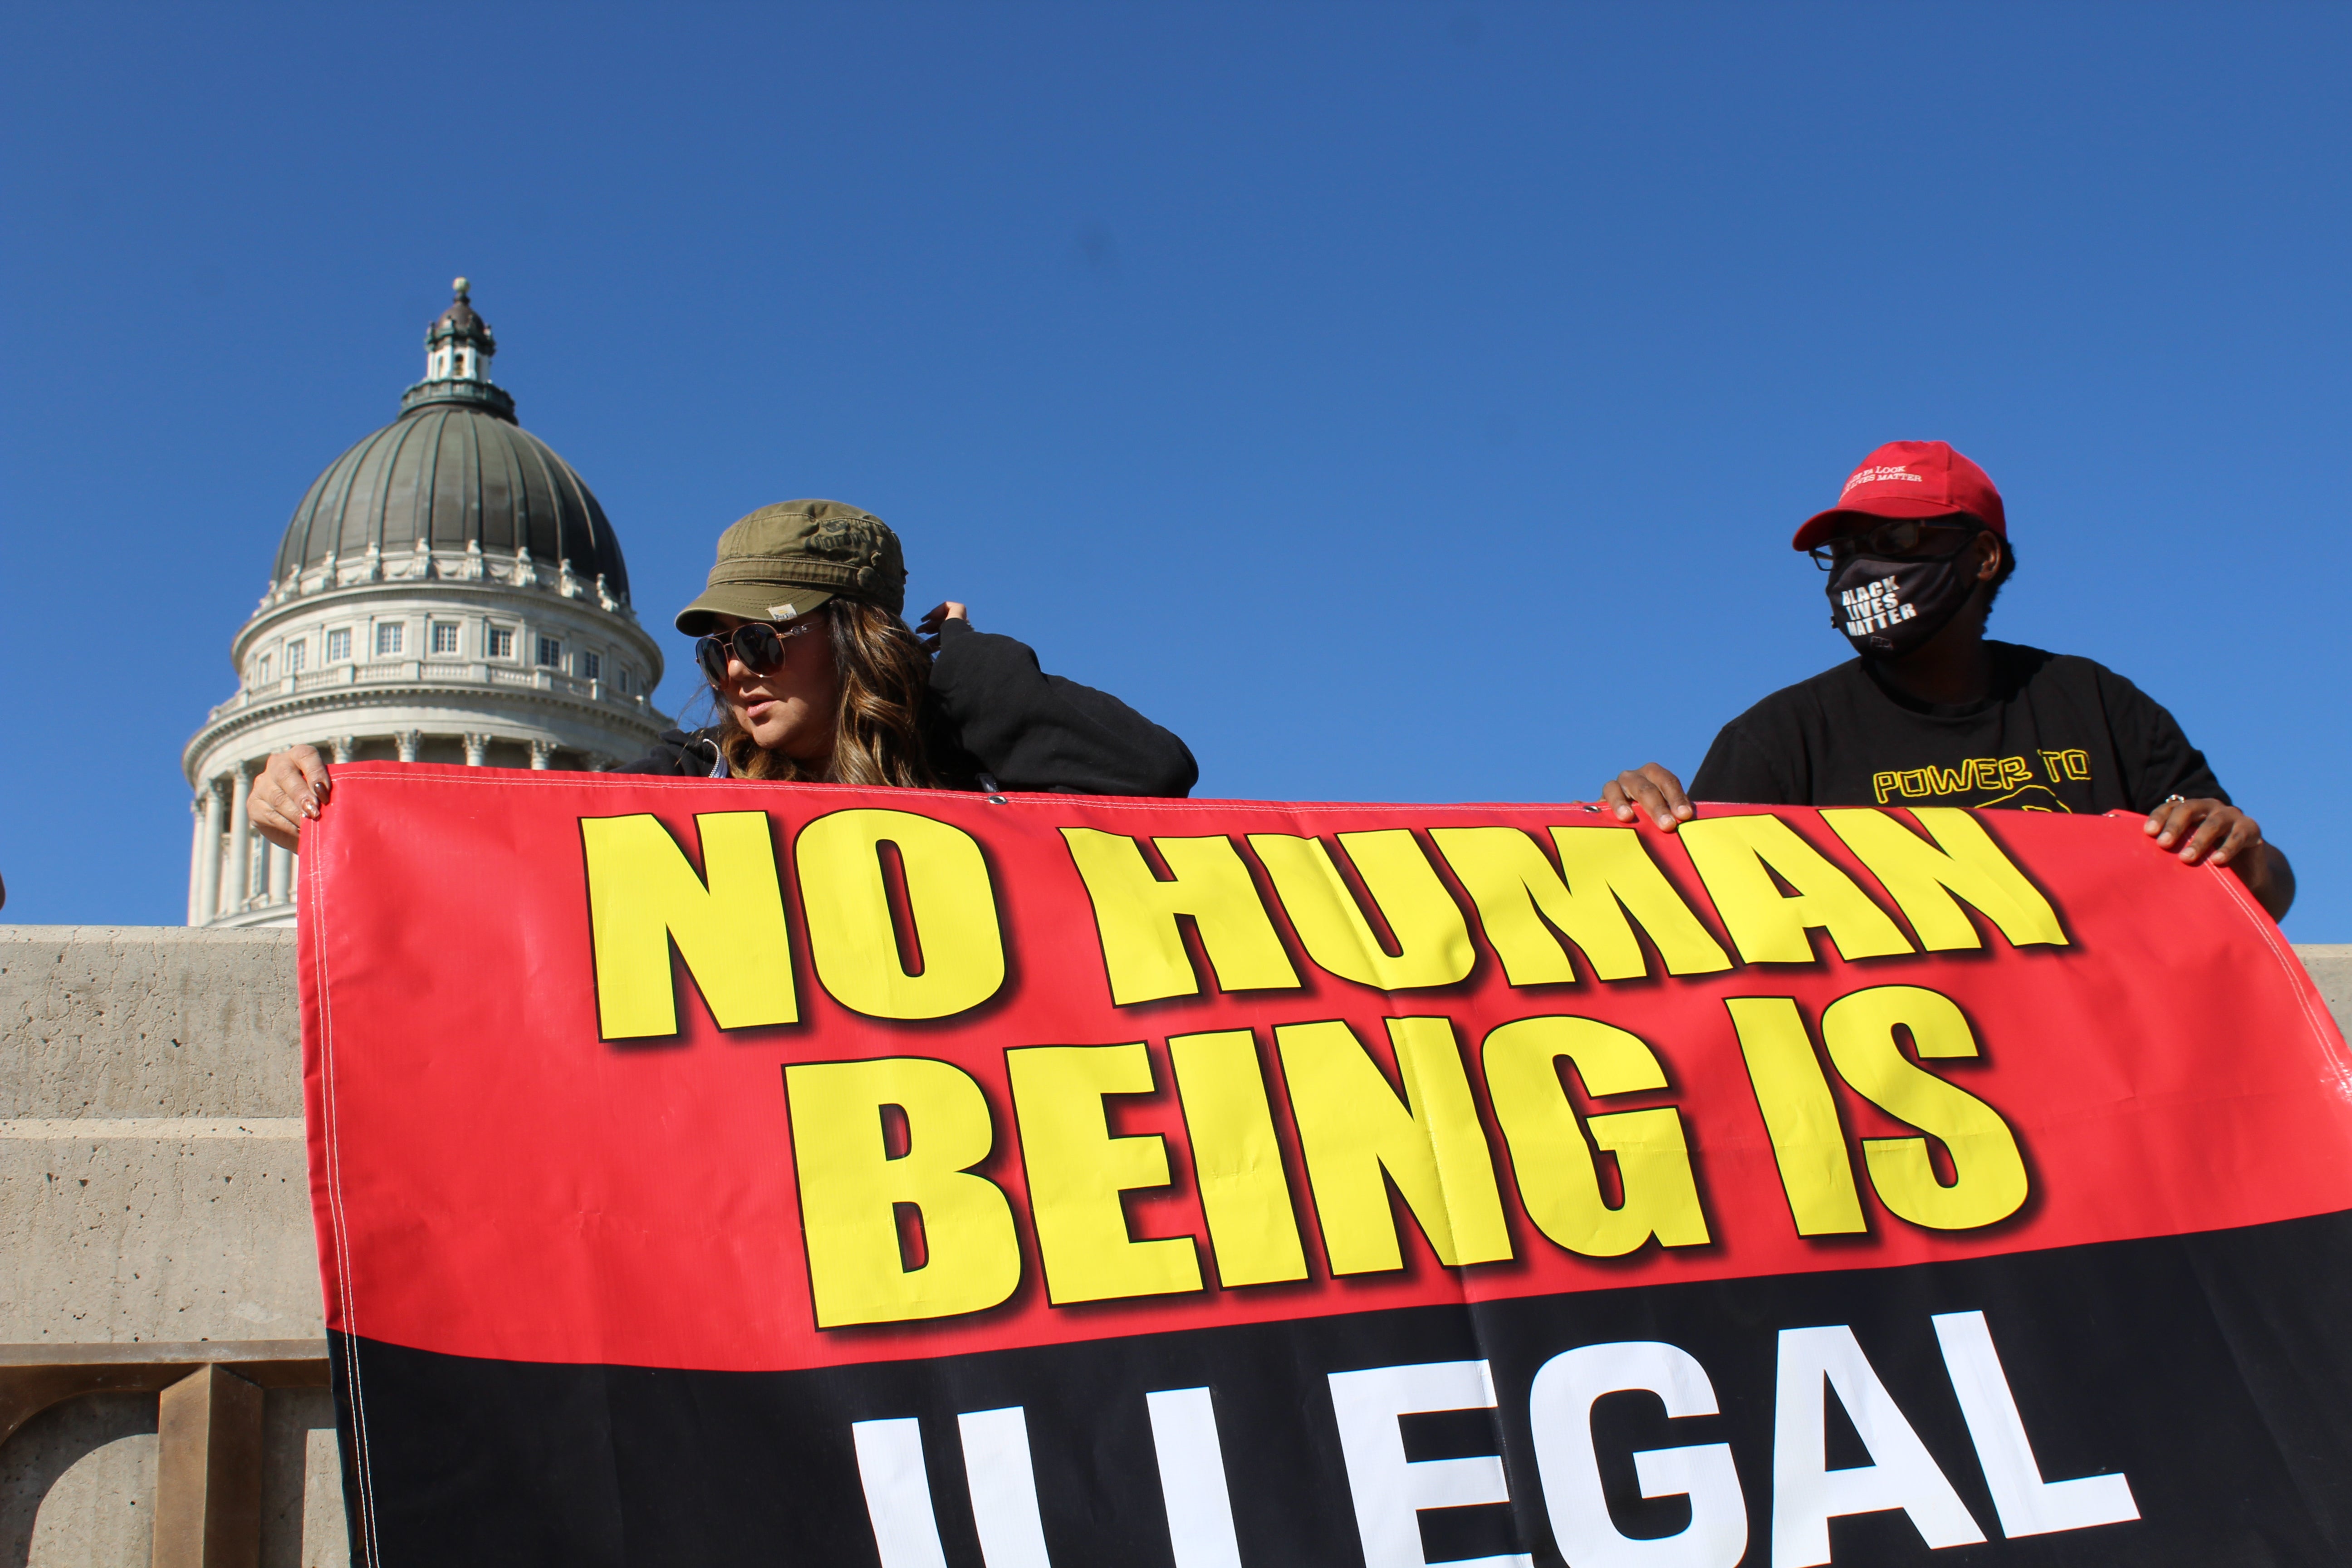 Activist Ma Black helps rally organizer Natasha Cadet put up a banner emblazoned with the message “No human being is illegal” at the Utah Capitol grounds.